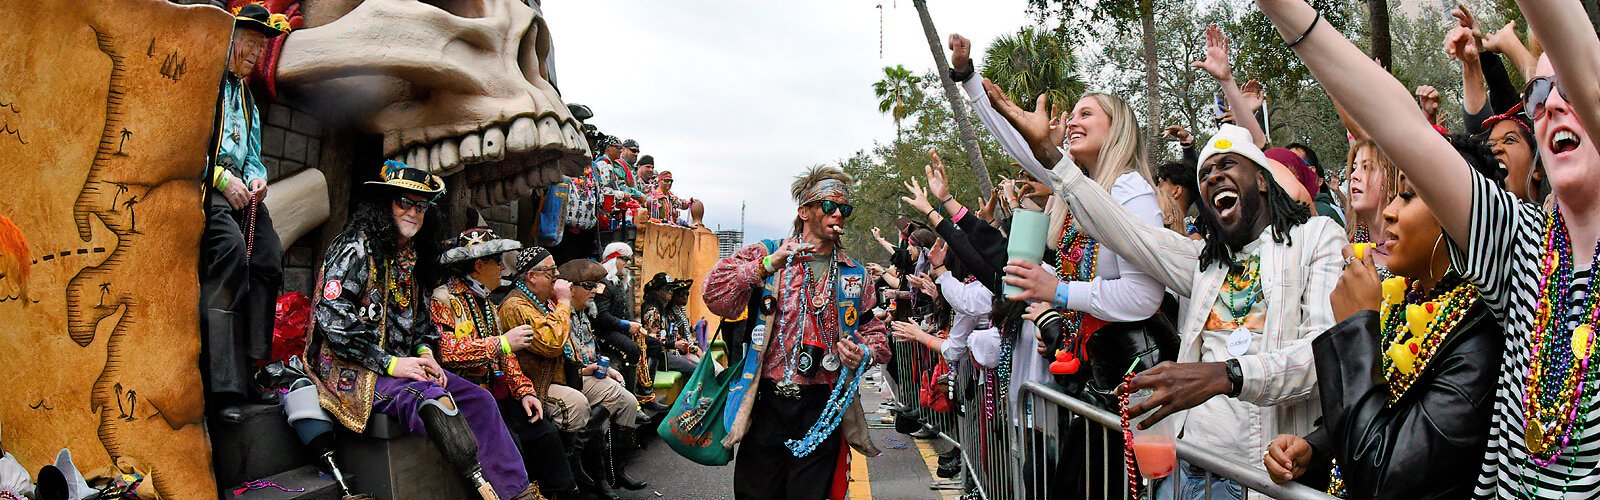 Excited revelers scream for beads as a pirate float passes by them.